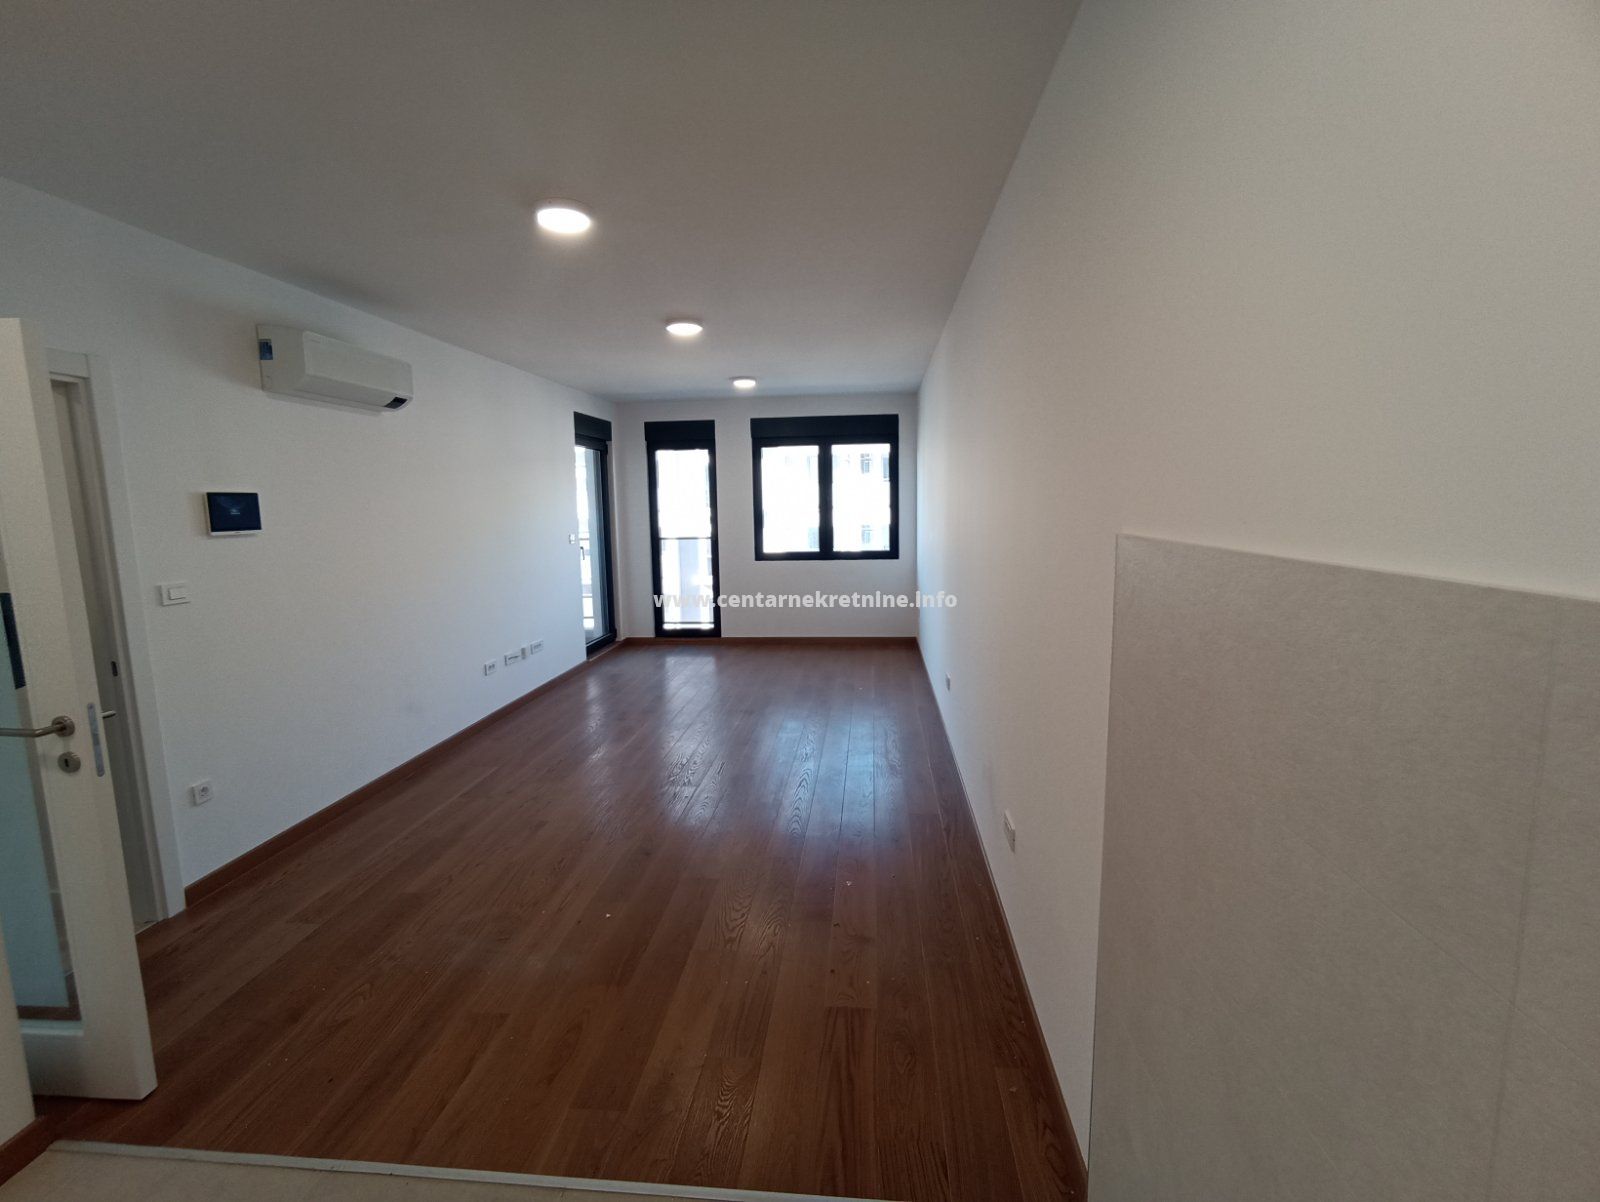 For rent, office space 68m2, Green level, Toloska forest, Podgorica